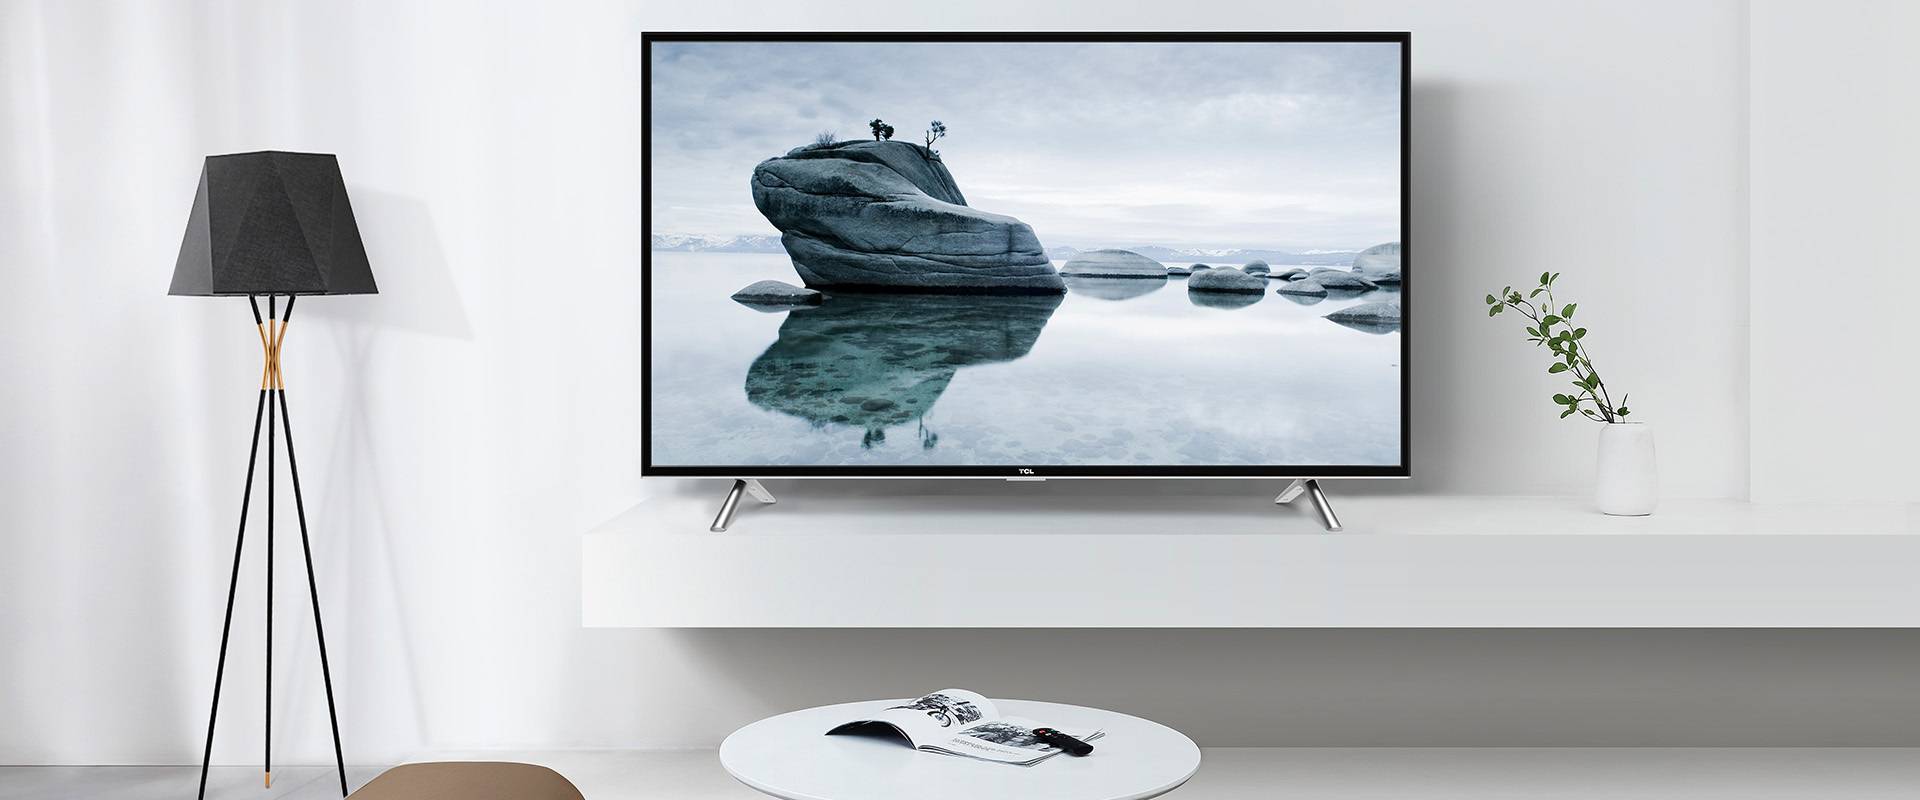 How To Set The Best Picture On A Samsung LED TV